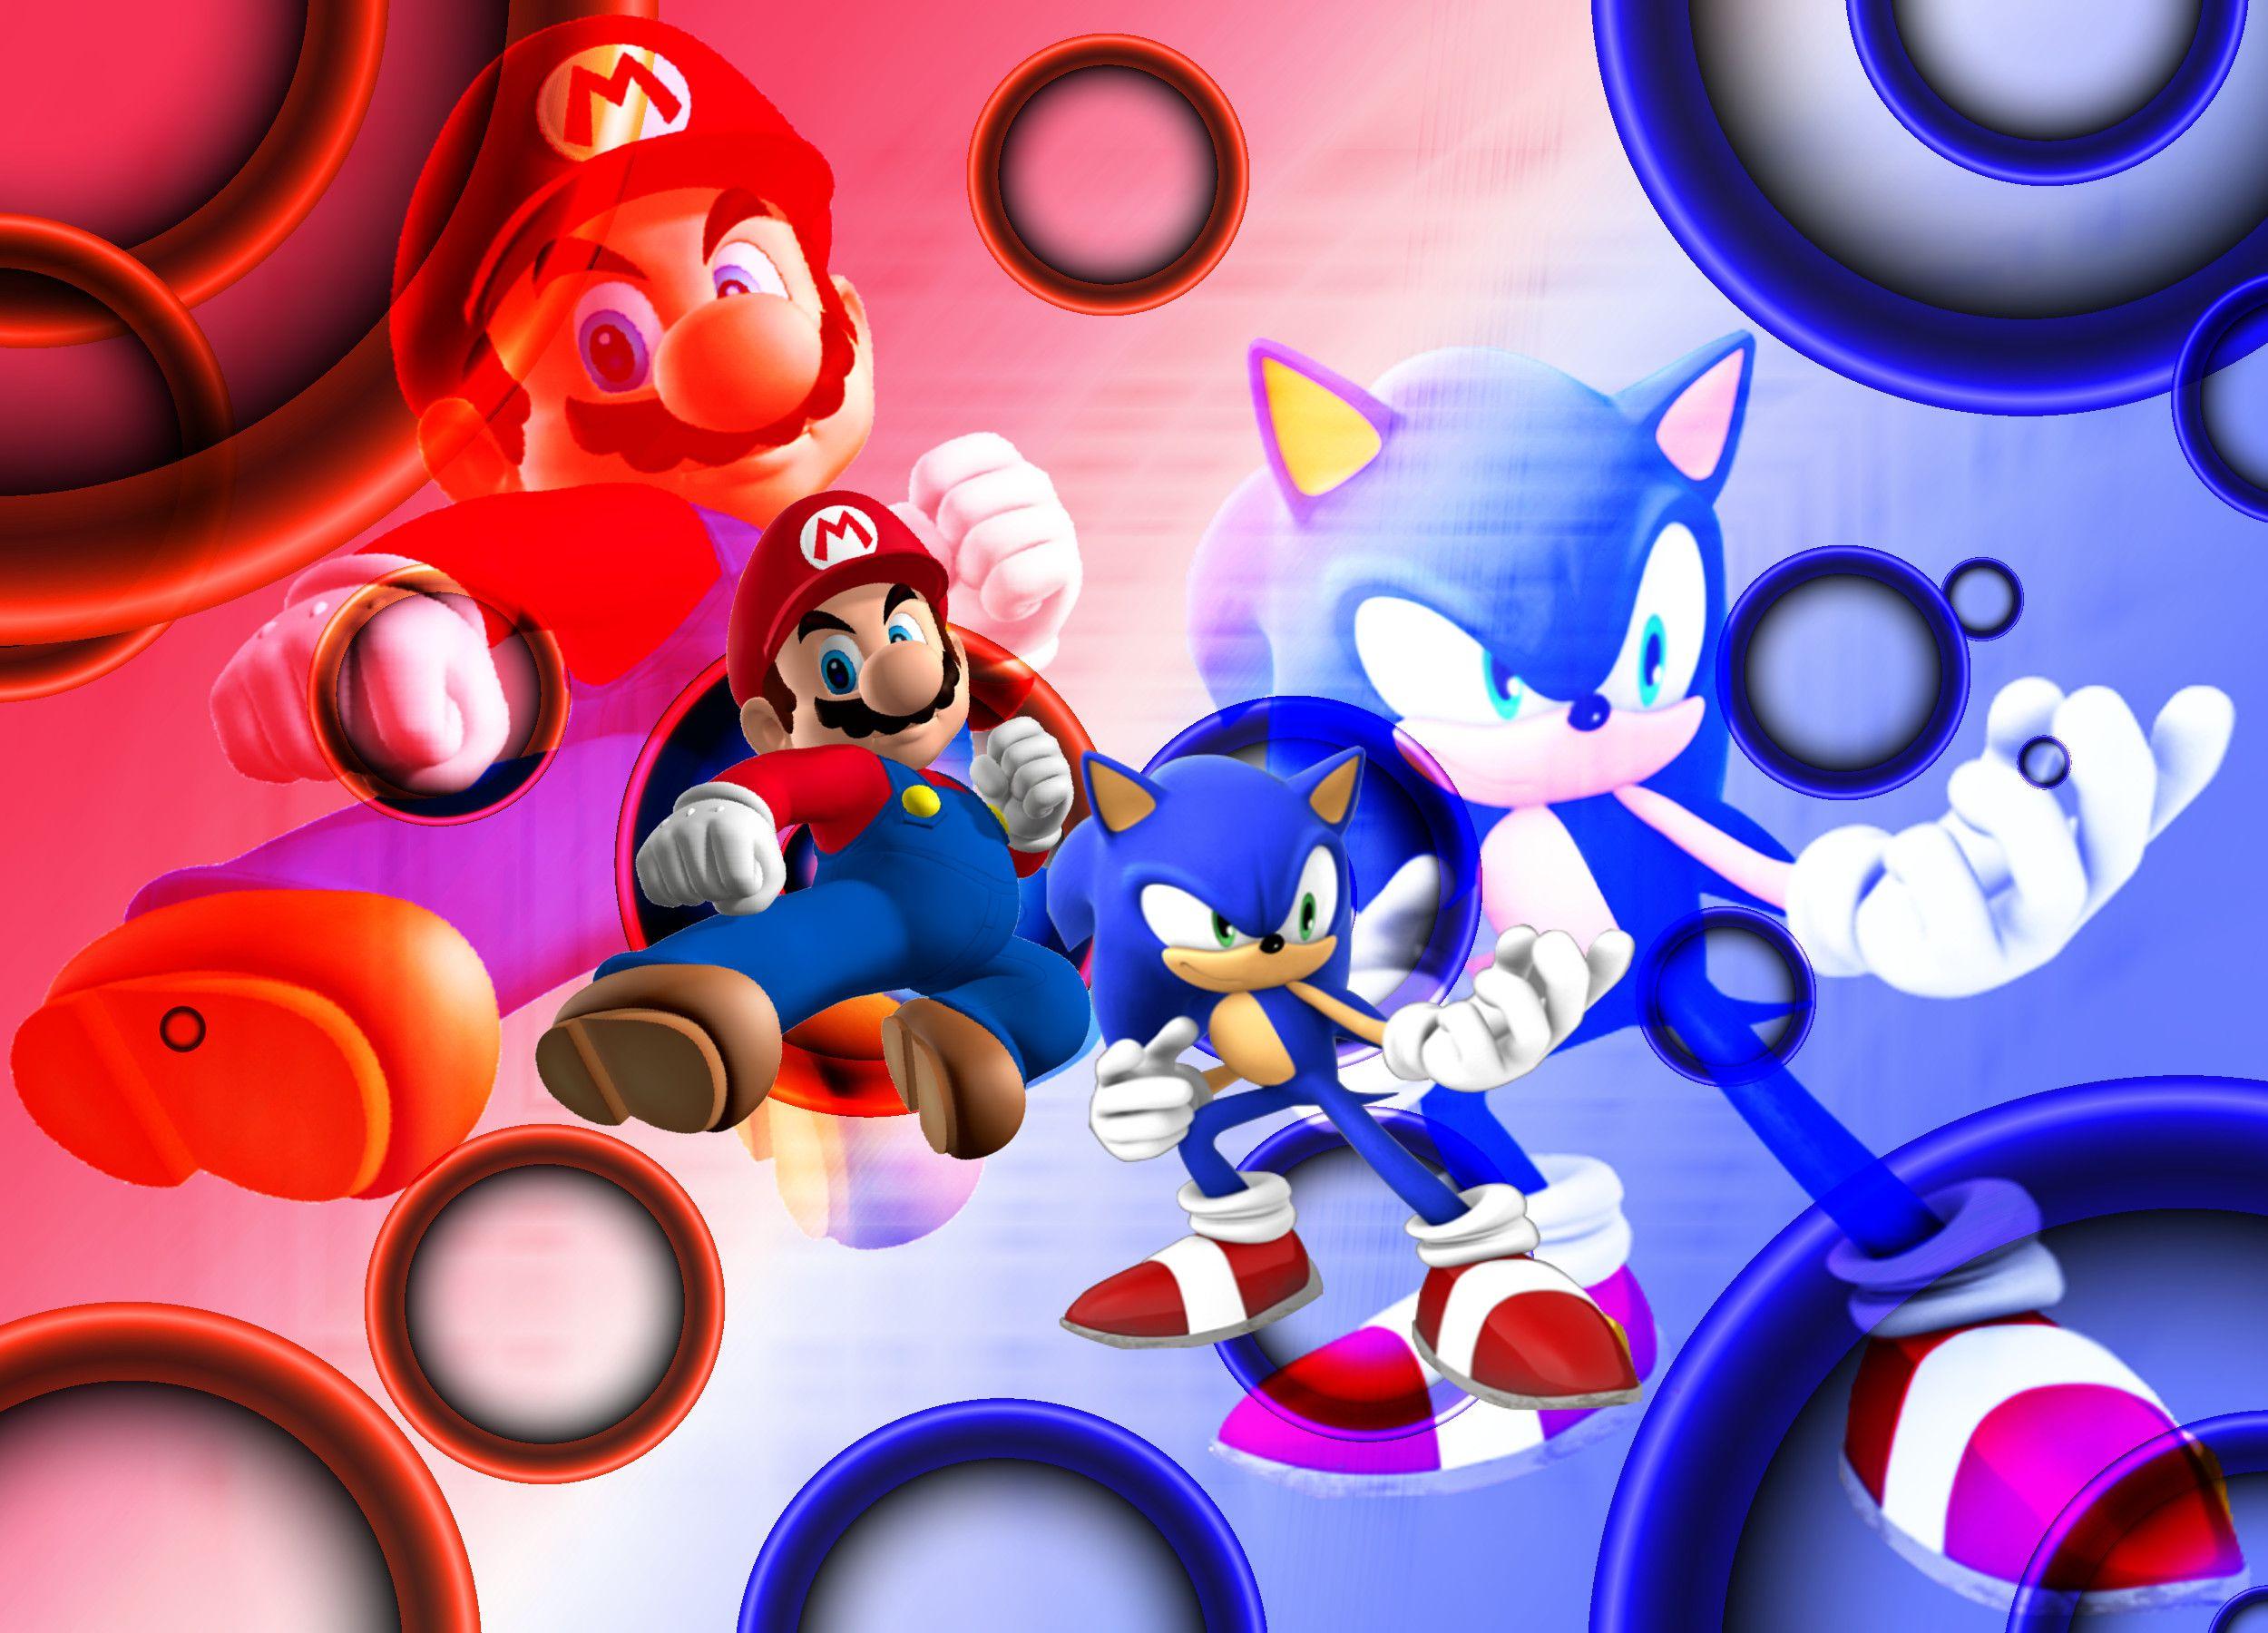 Mario and Sonic Wallpaper 2500x Download. Sonic, Mario, Sonic the hedgehog